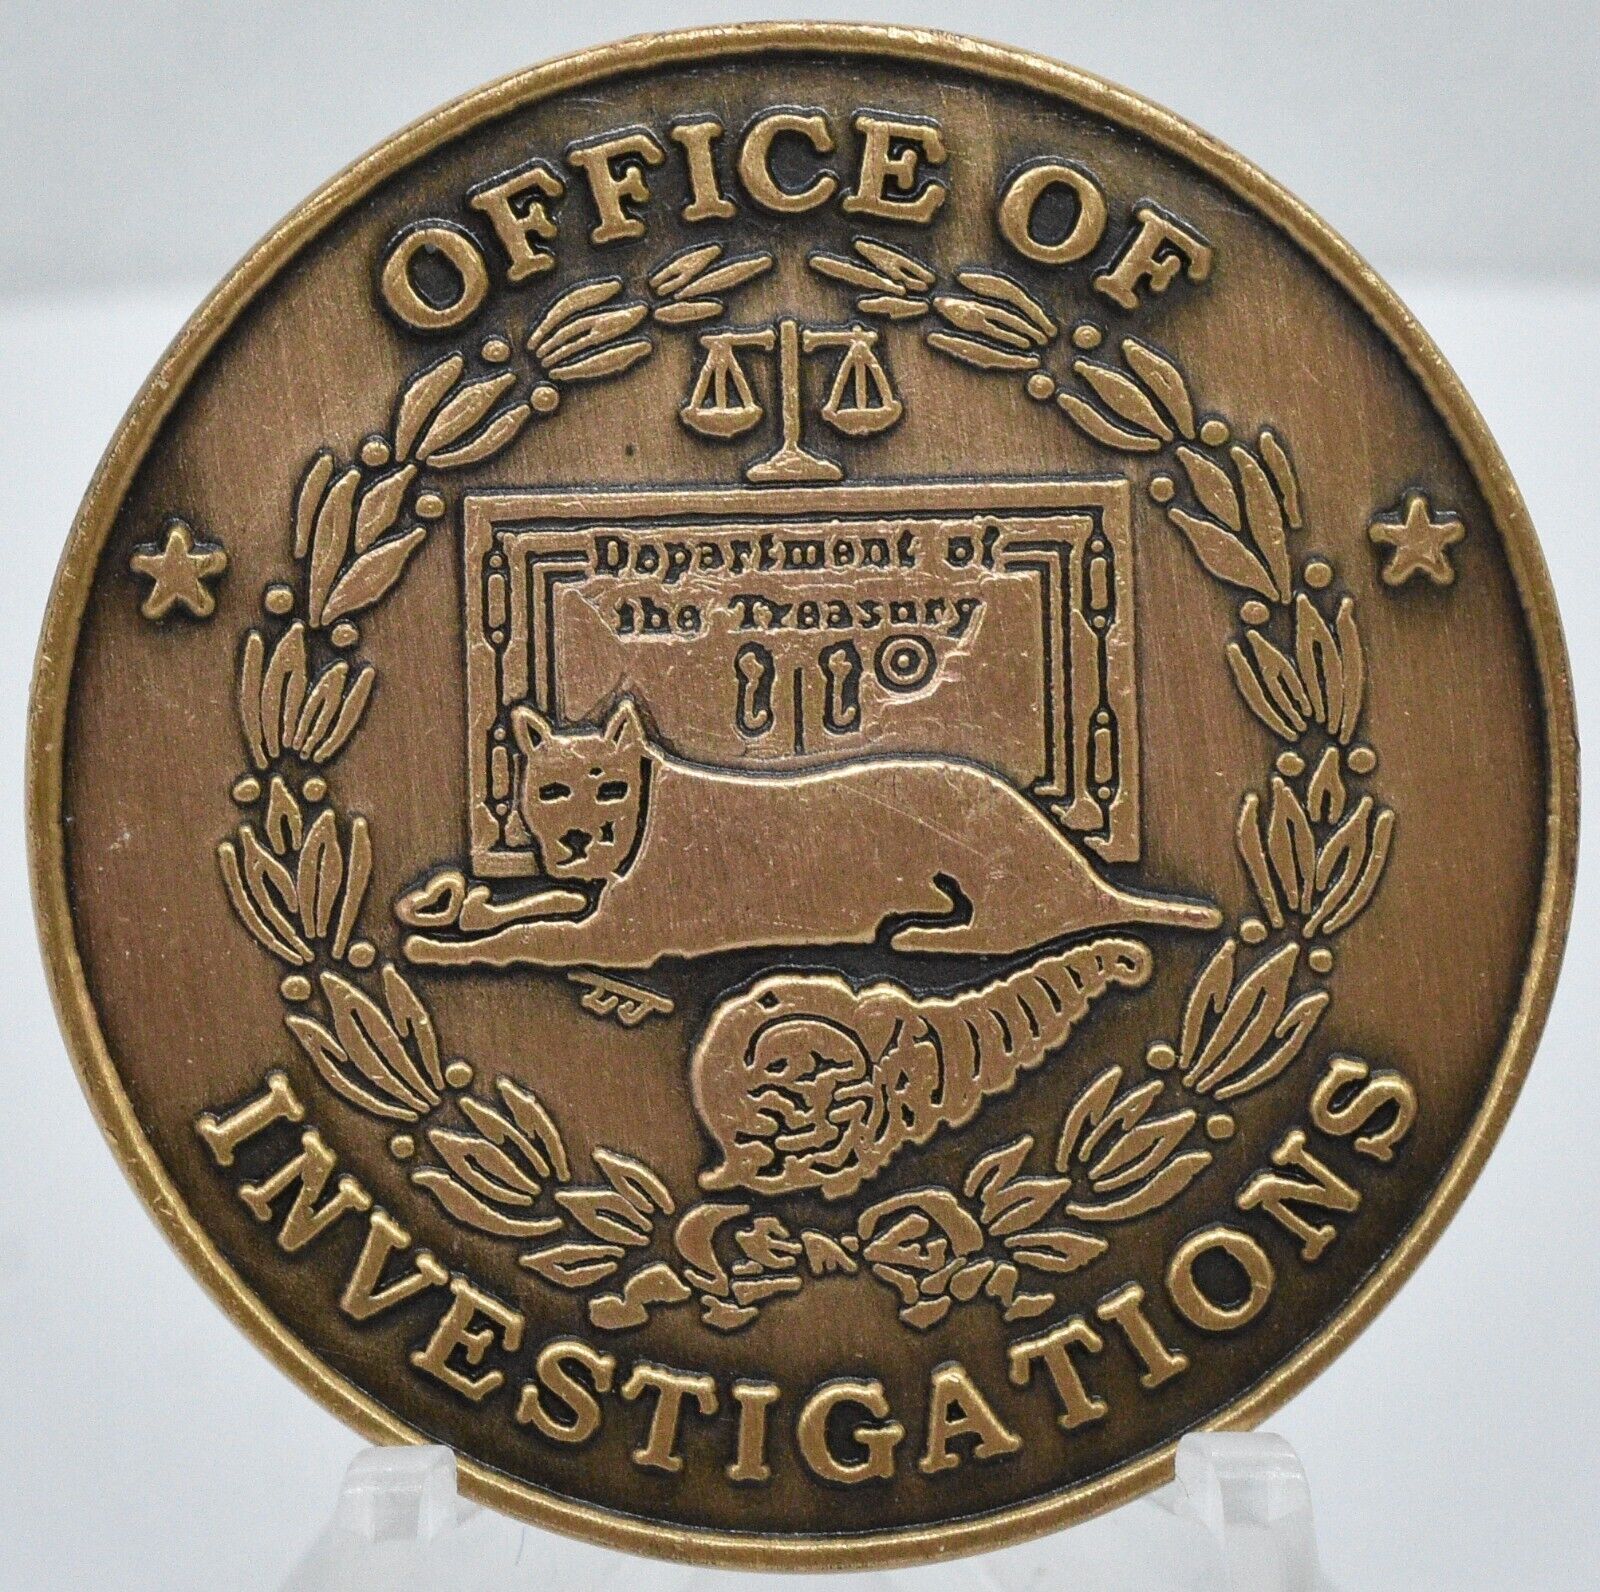 Treasury Department Inspector General Office of Investigations Challenge Coin